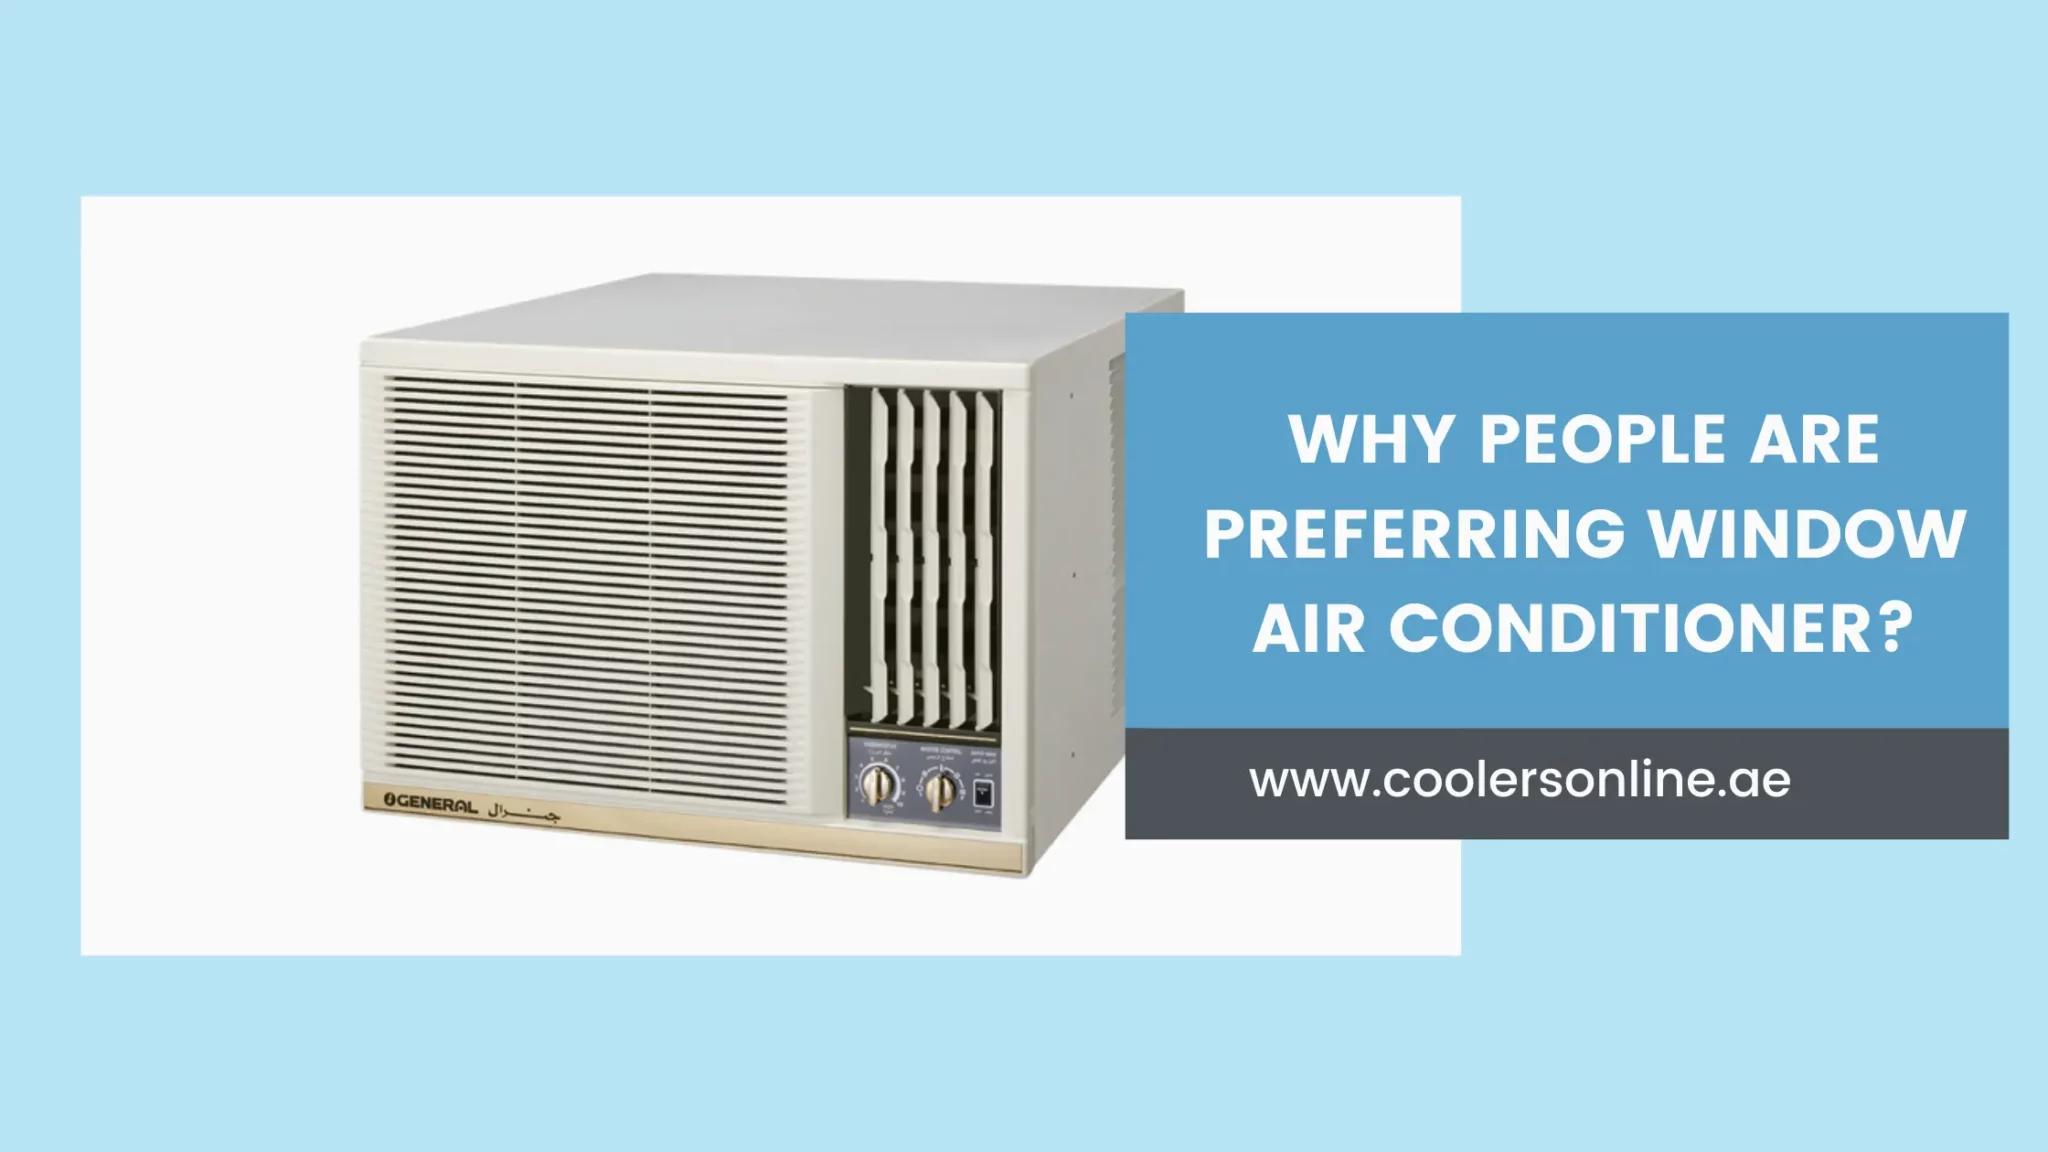 Why People are Preferring Window Air Conditioner